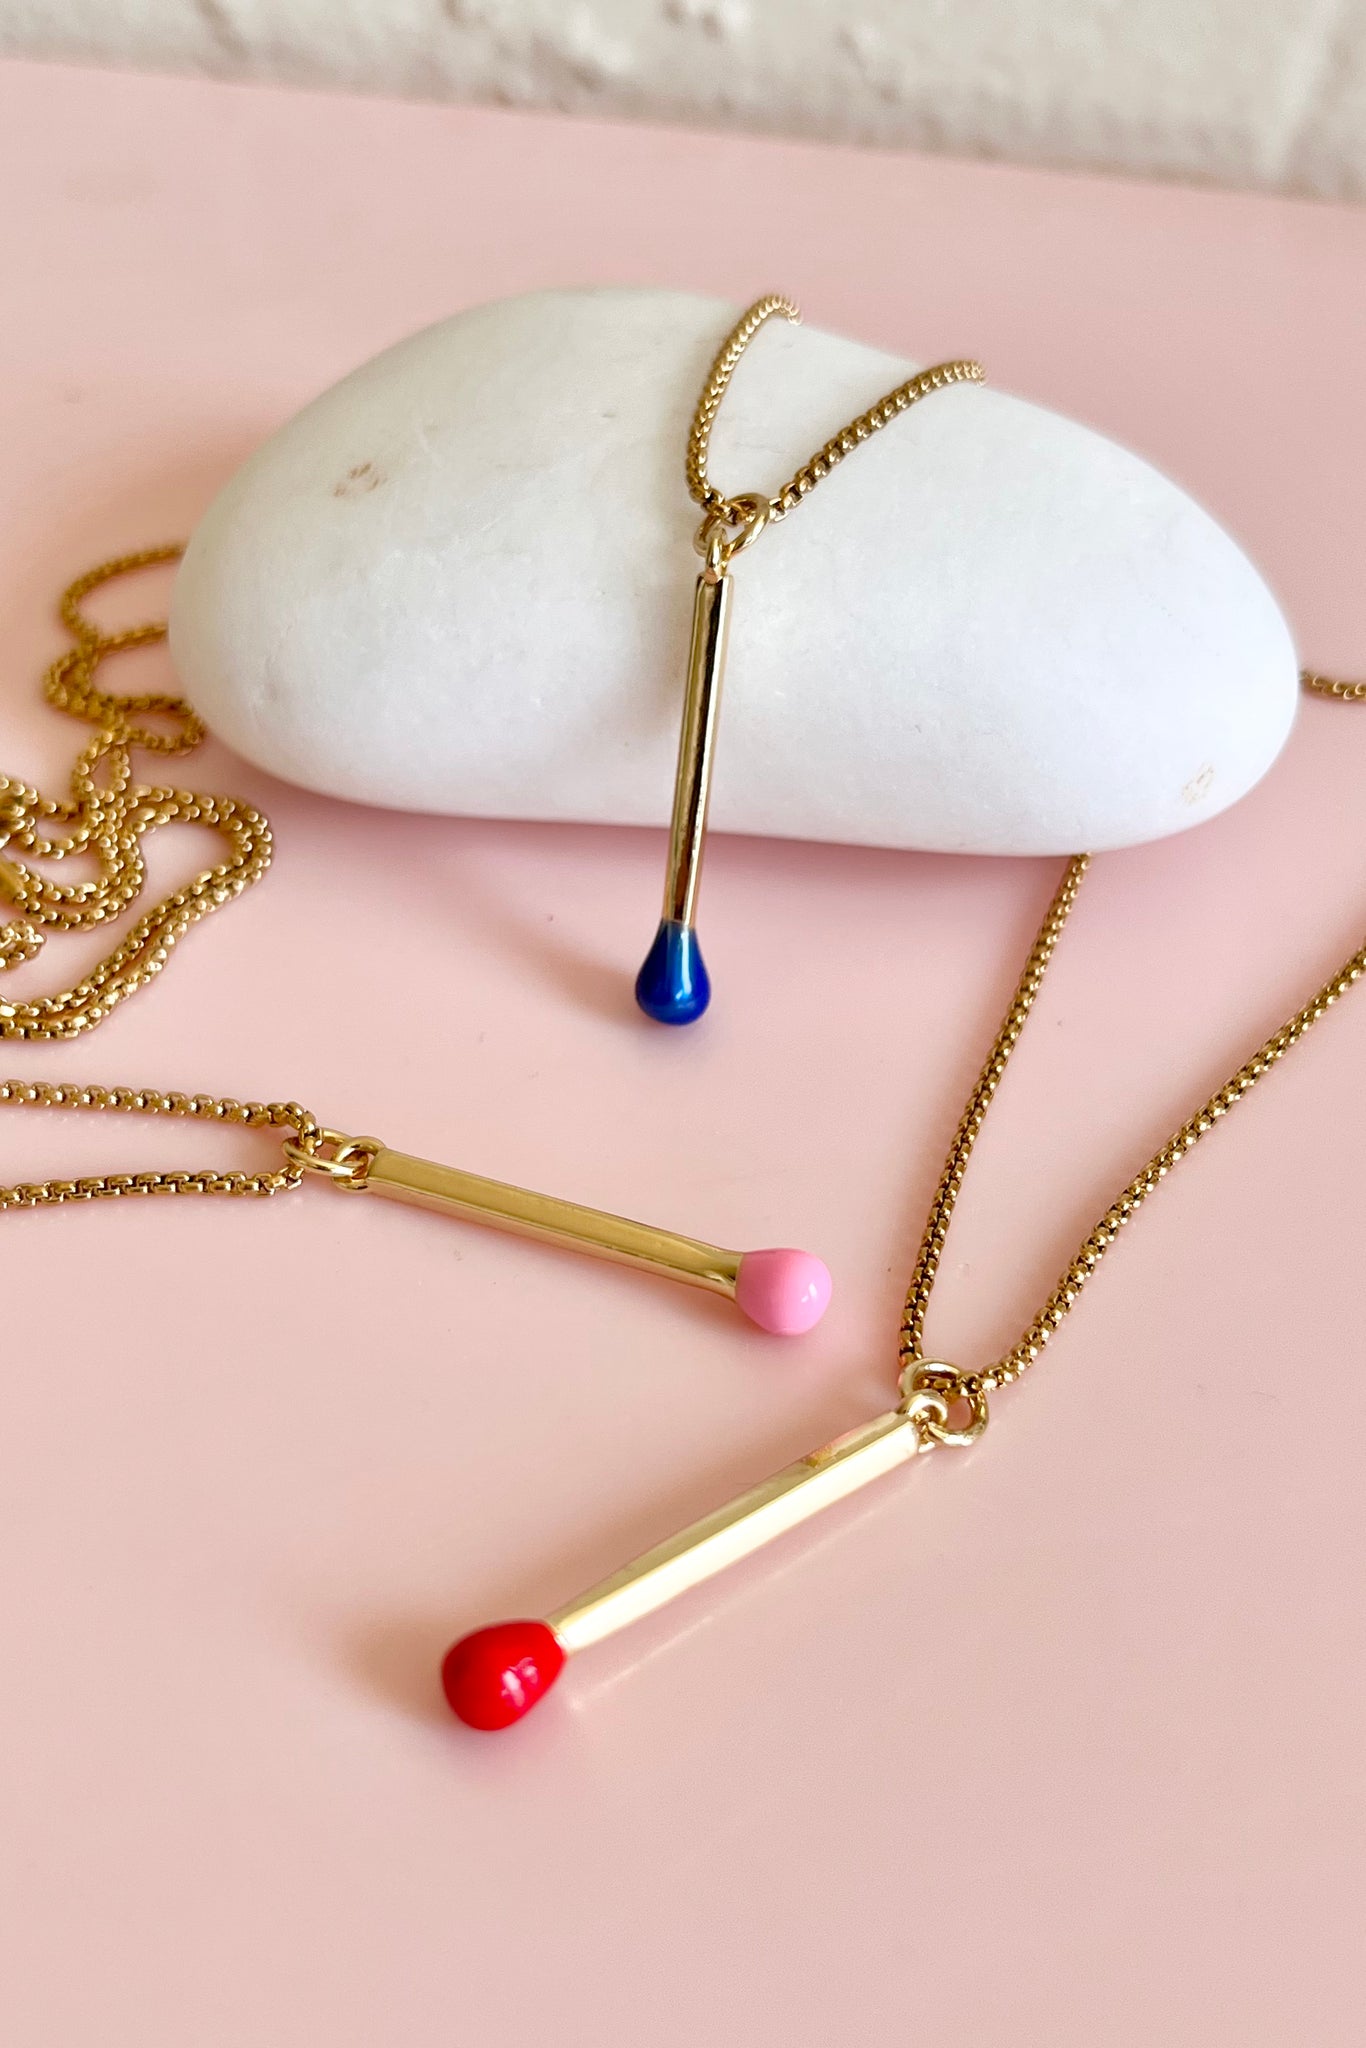 Penny Foggo - Matchstick Necklace - Pink, Red or Blue